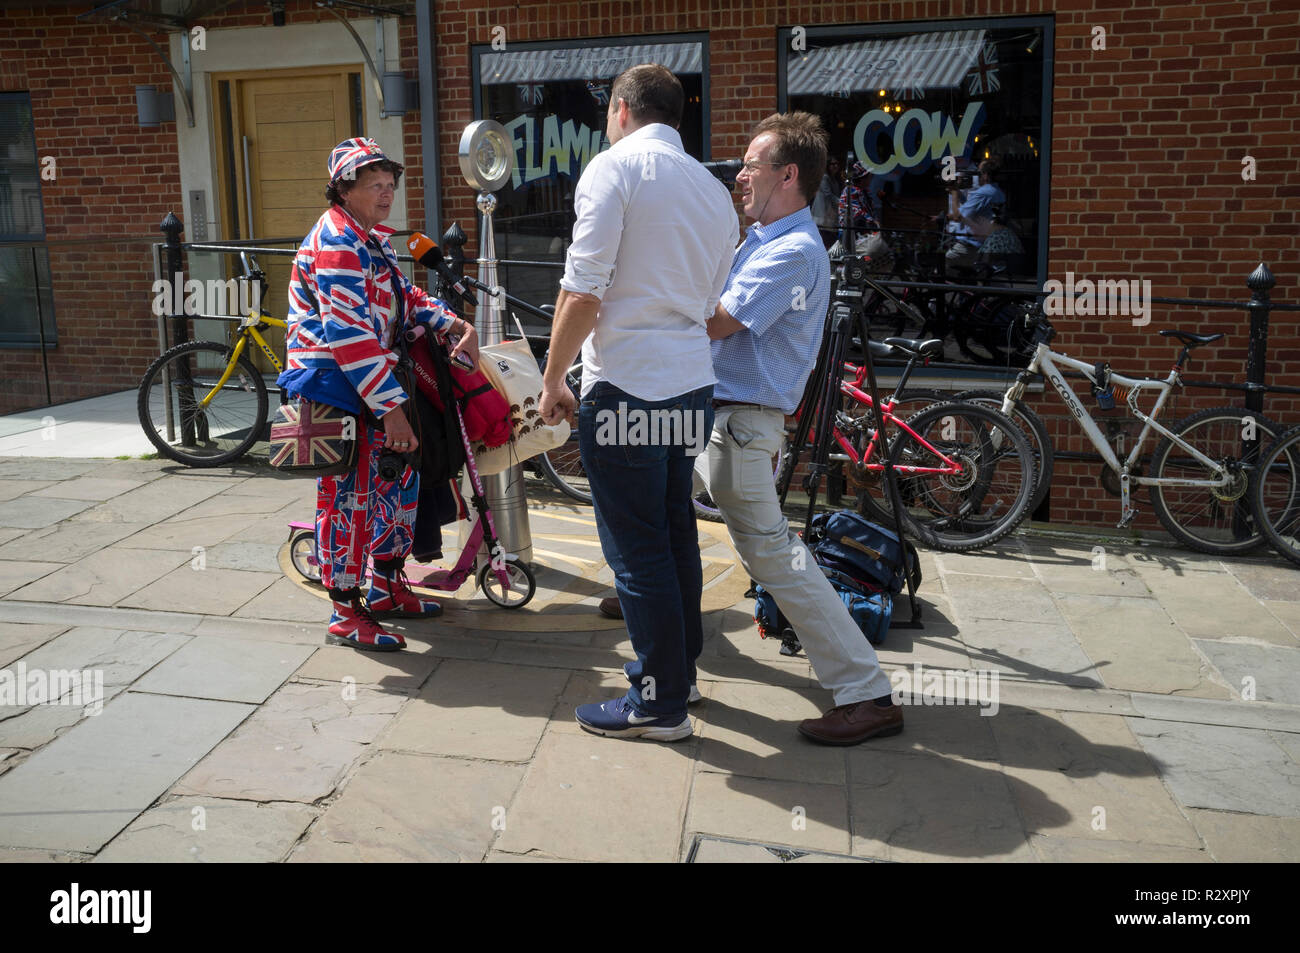 A TV crew interviews a lawoman in a Union Jack suit on the day before the Royal Wedding of Prince Harry and Meghan Markle. Stock Photo